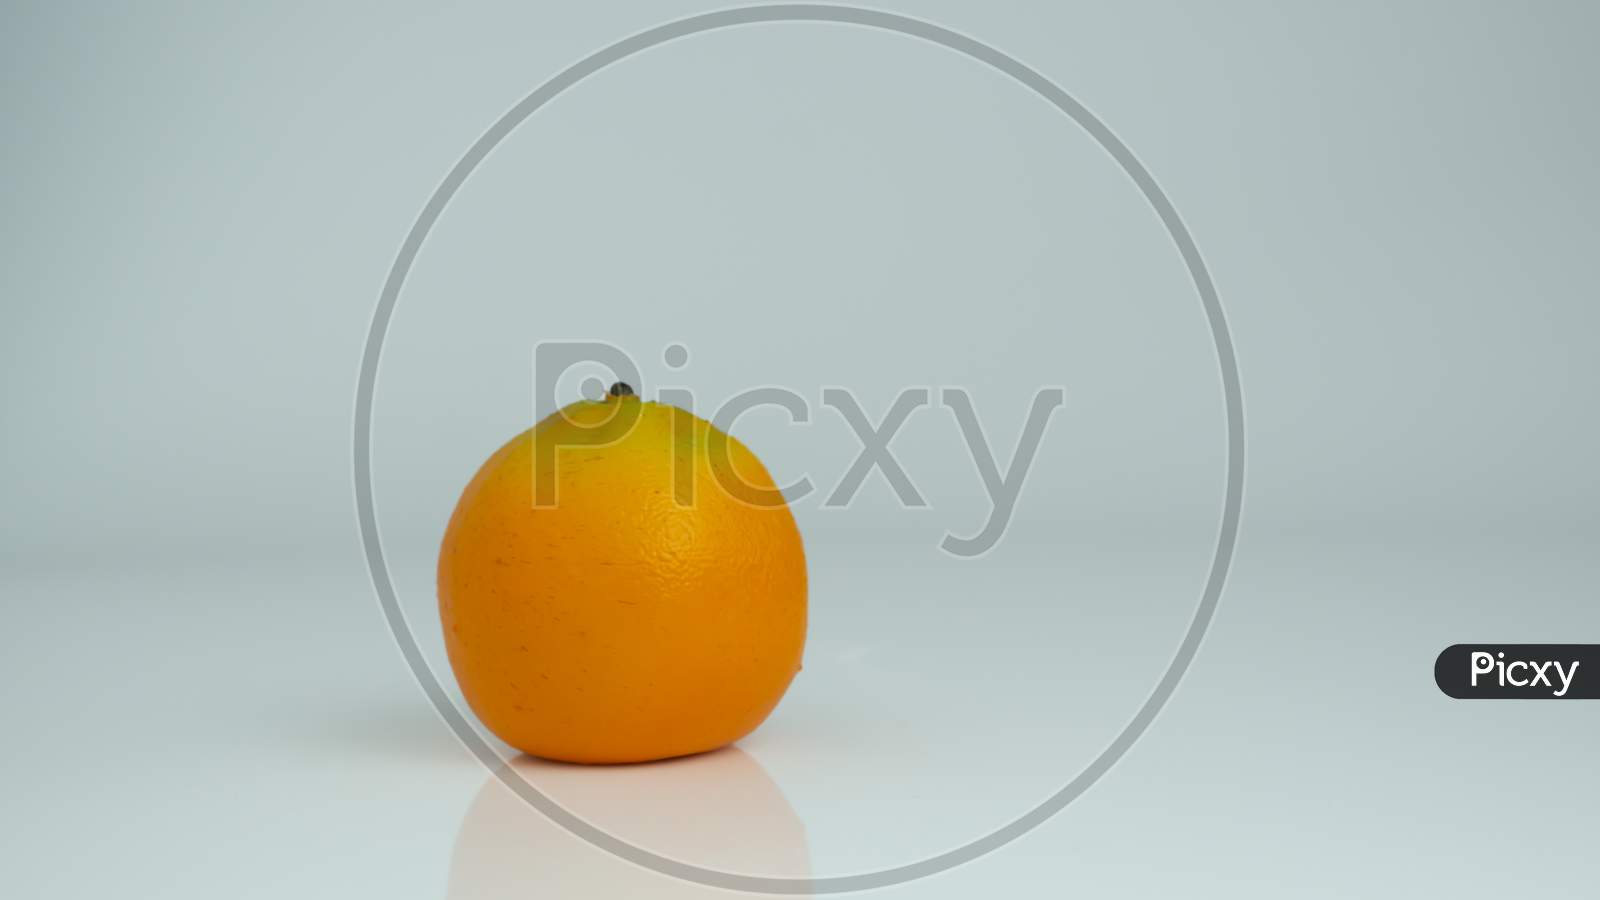 A jar with orange juice with a whole orange kept beside on an isolated background